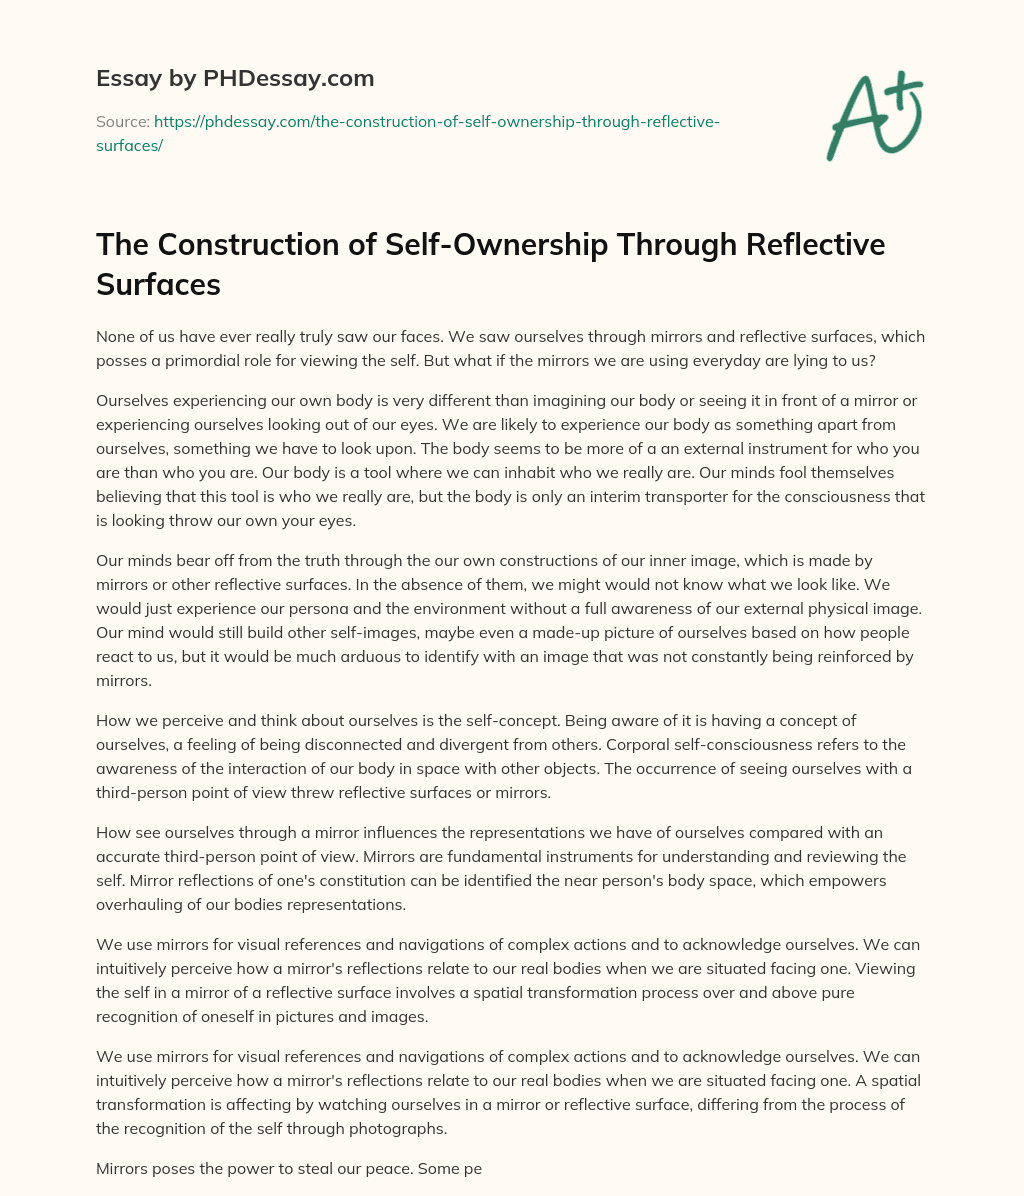 The Construction of Self-Ownership Through Reflective Surfaces essay